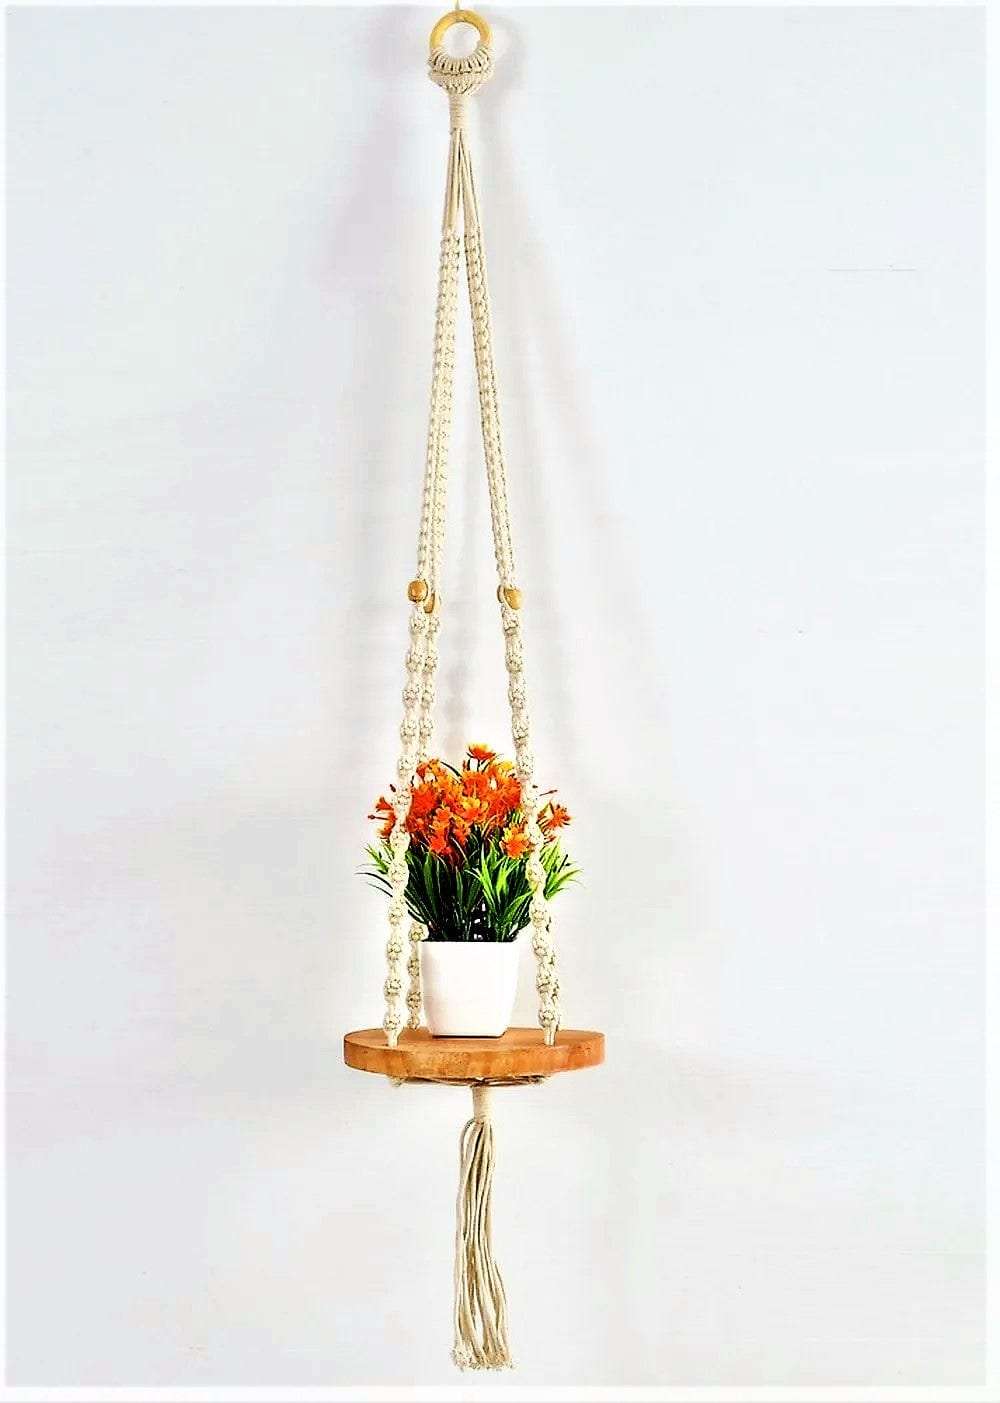 Macrame wall hanging with round shelf Writings On The Wall Wall Hanging